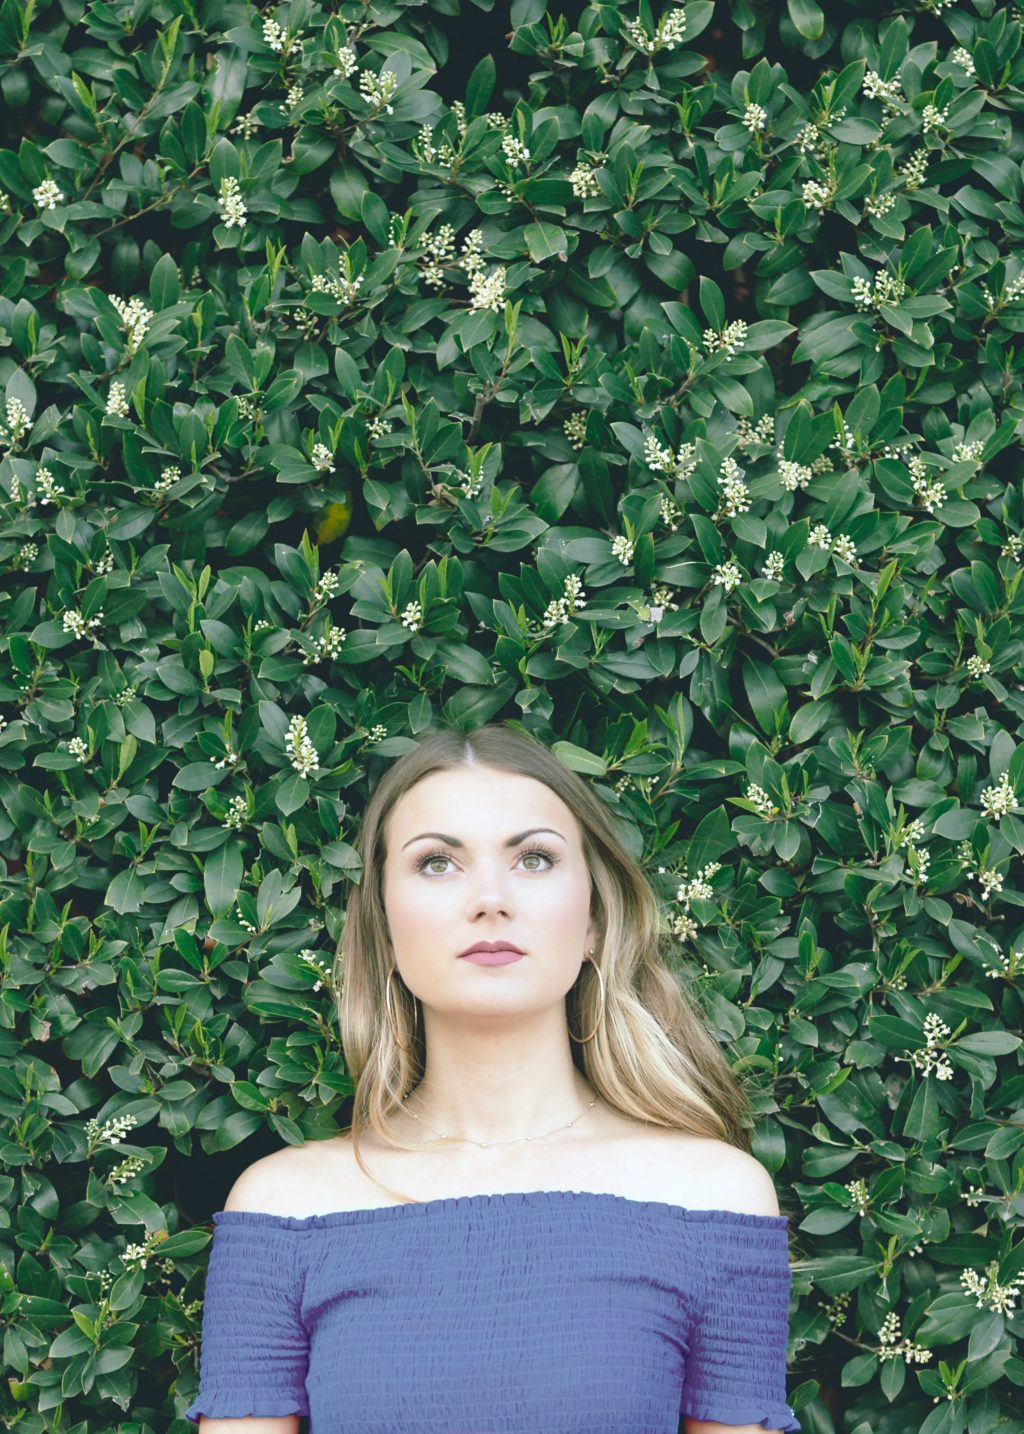 Woman stands in front of a green live plant wall, looks up pensively